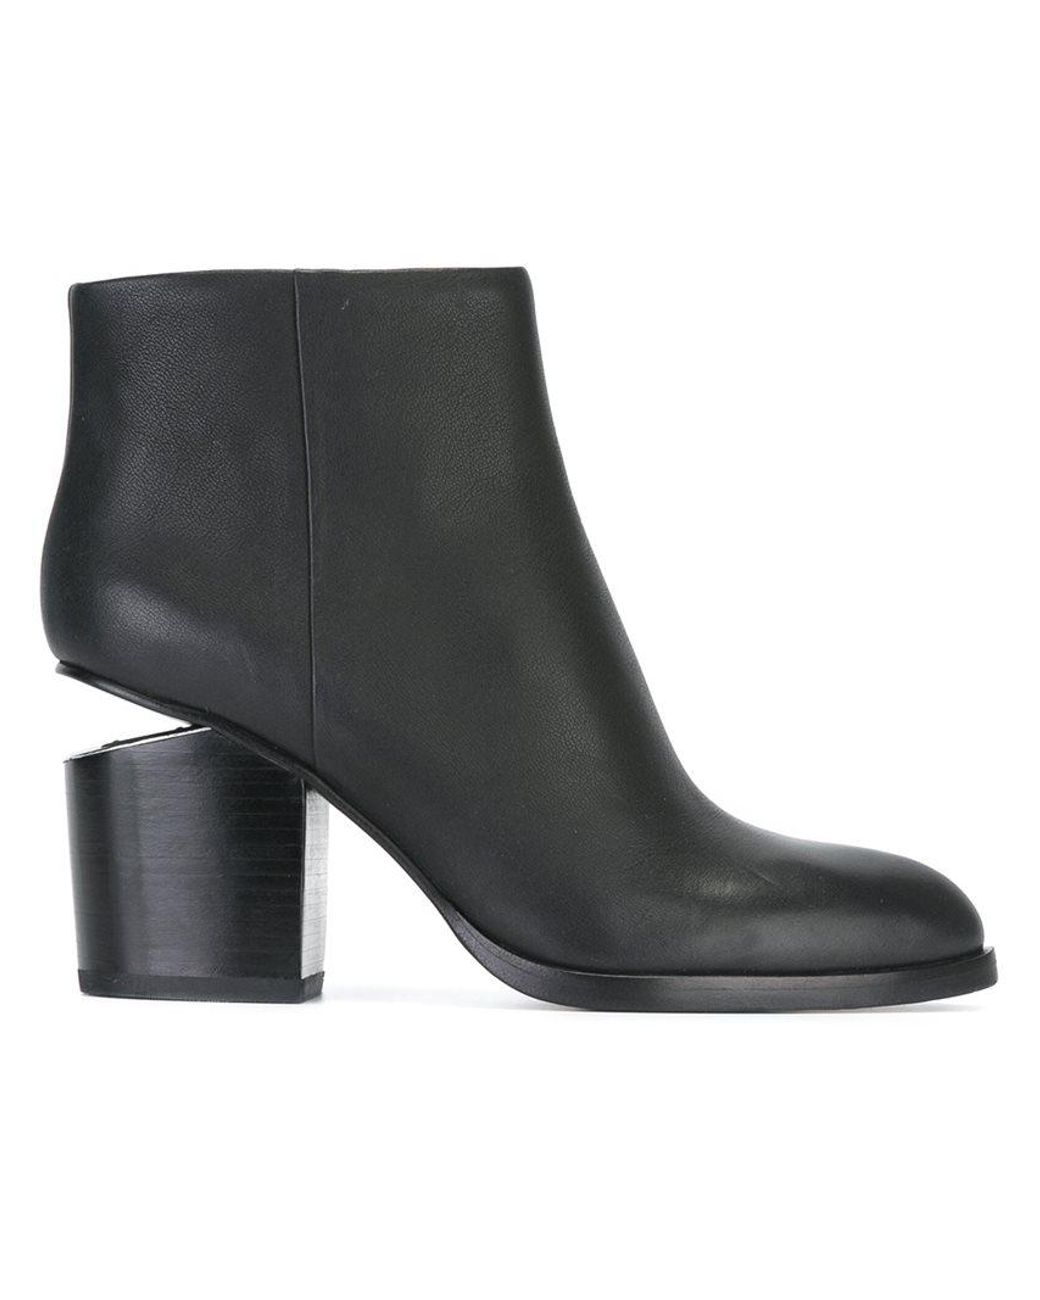 Lyst - Alexander Wang Gabi Leather Silver-Cutout Ankle Boots in Black ...